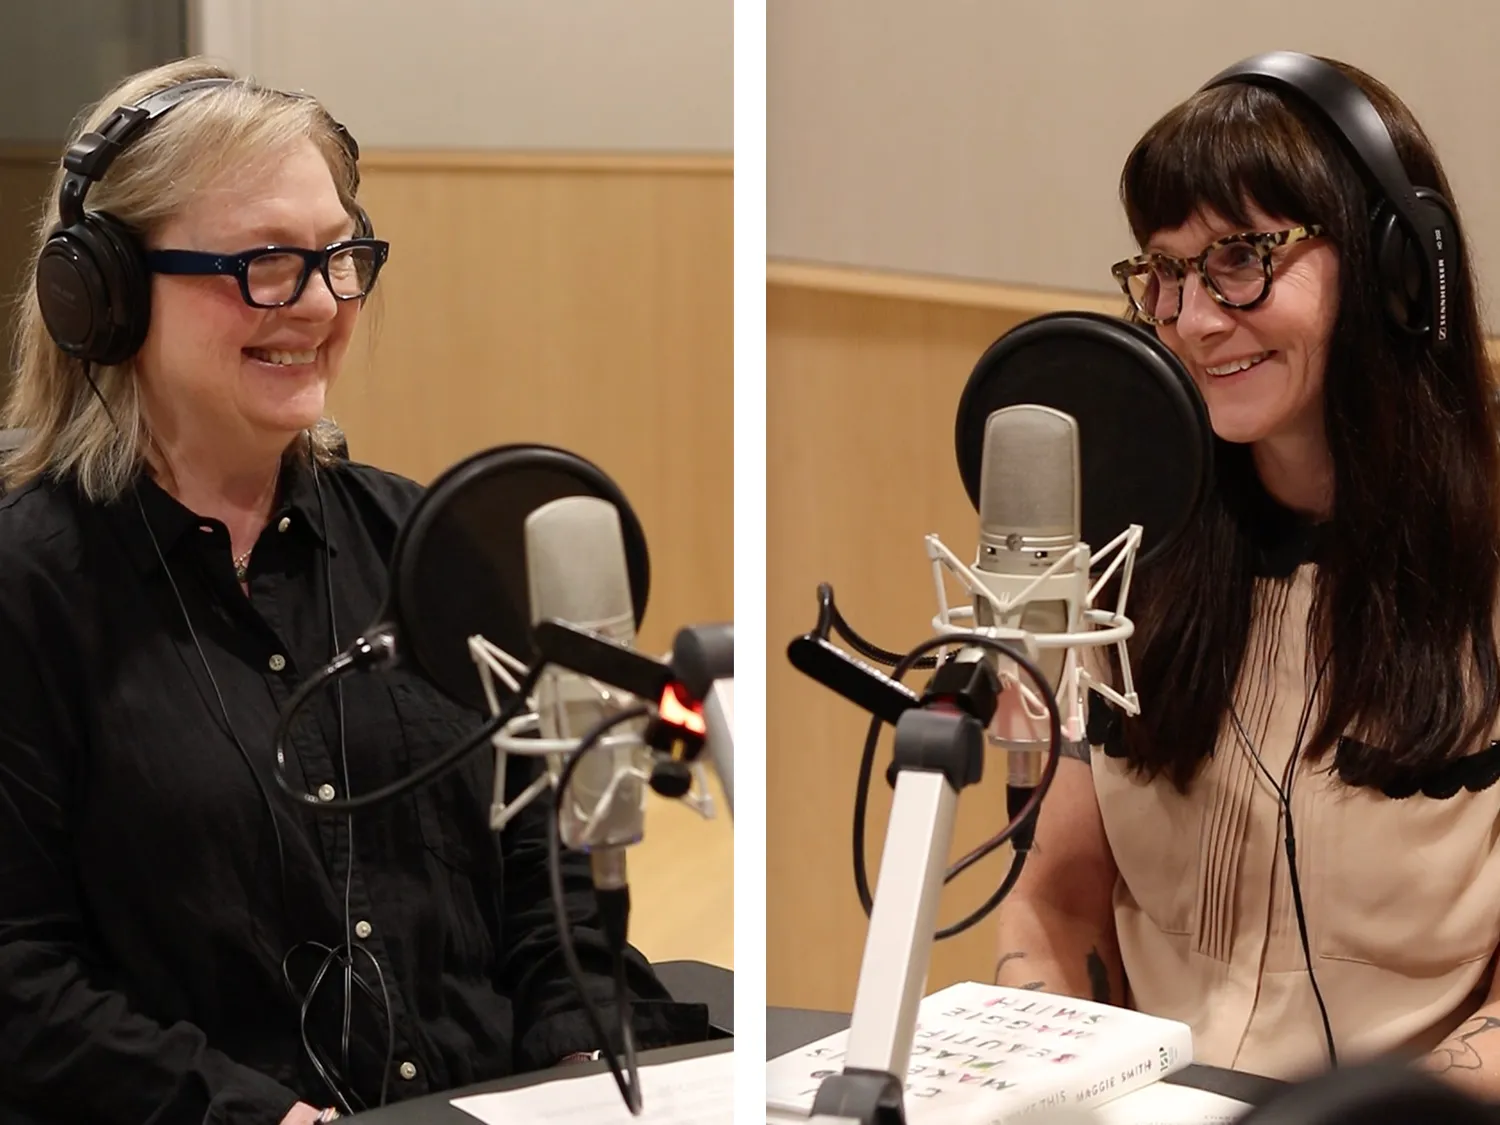 Two photos presented side by side show two women in the recording studio where they had their conversation. On the left is Kathy Fagan Grandinetti. She's a light-haired woman smiling cheekily as she looks to the side. The other woman is Maggie Smith. She has long dark hair and blunt-cut bangs, and is smiling as she talks. Both wear headphones and sit before microphones.